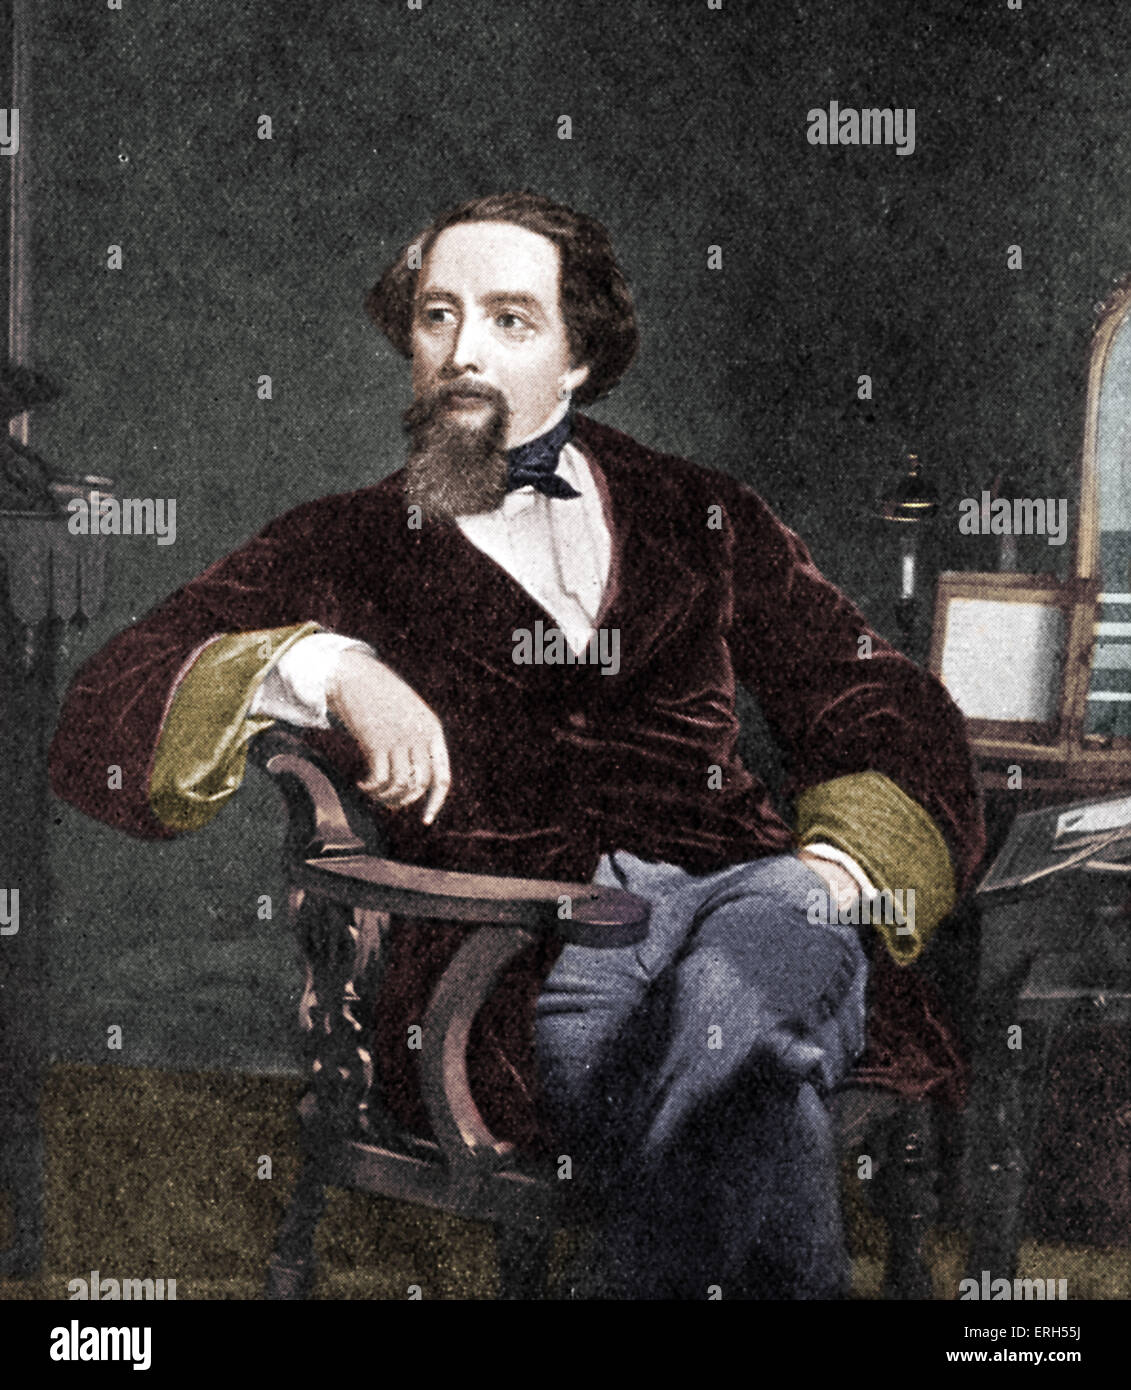 Charles Dickens portrait  -1859  .(from painting by WF Frith) . British novelist 7 February 1812 - 9 June 1870. Colourised Stock Photo